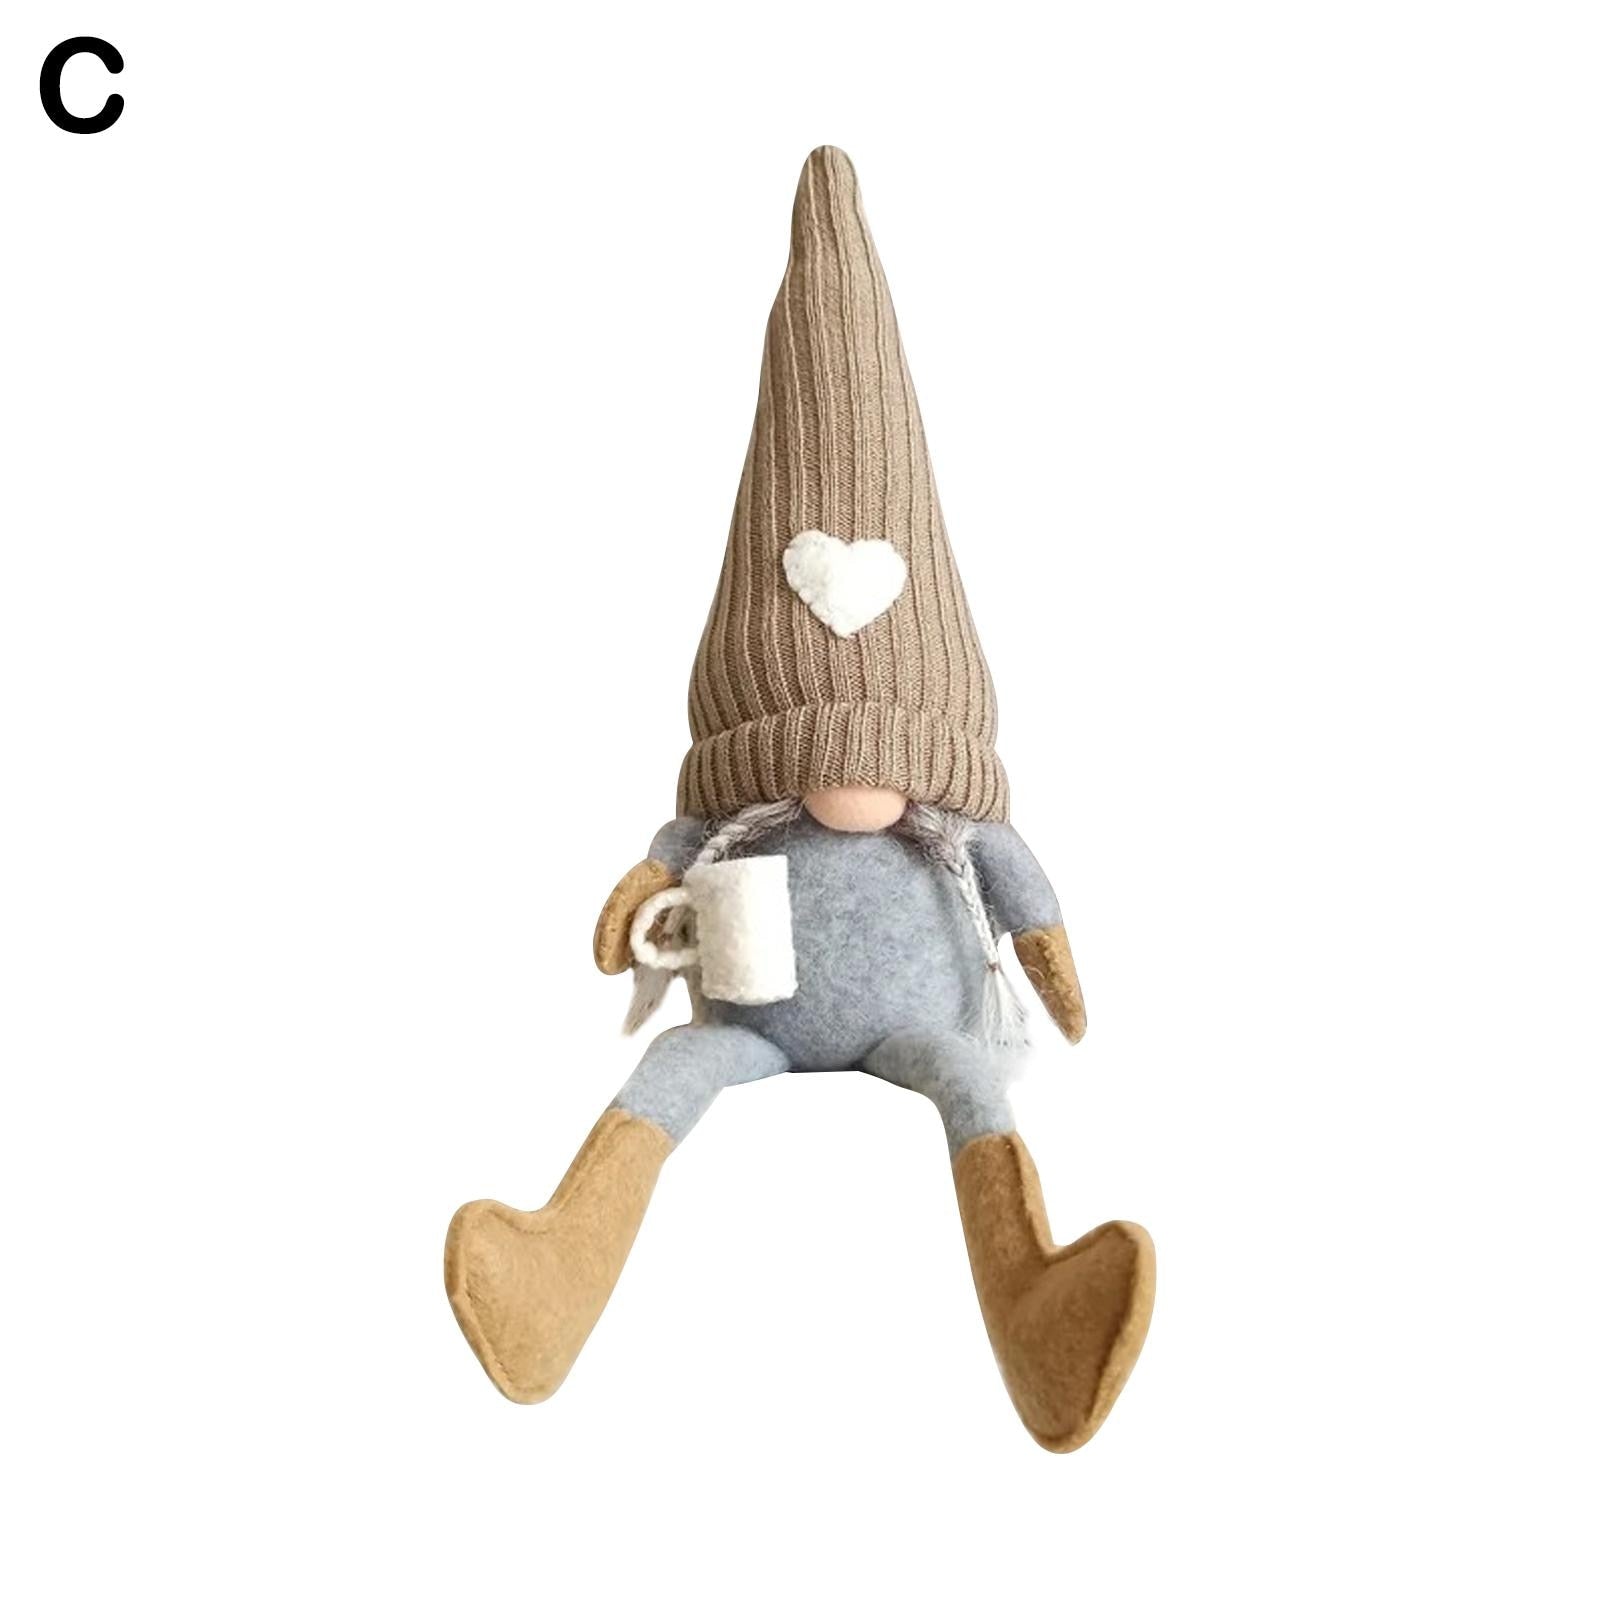 Fall coffee gnomes with cup in hand Home décor festive brown